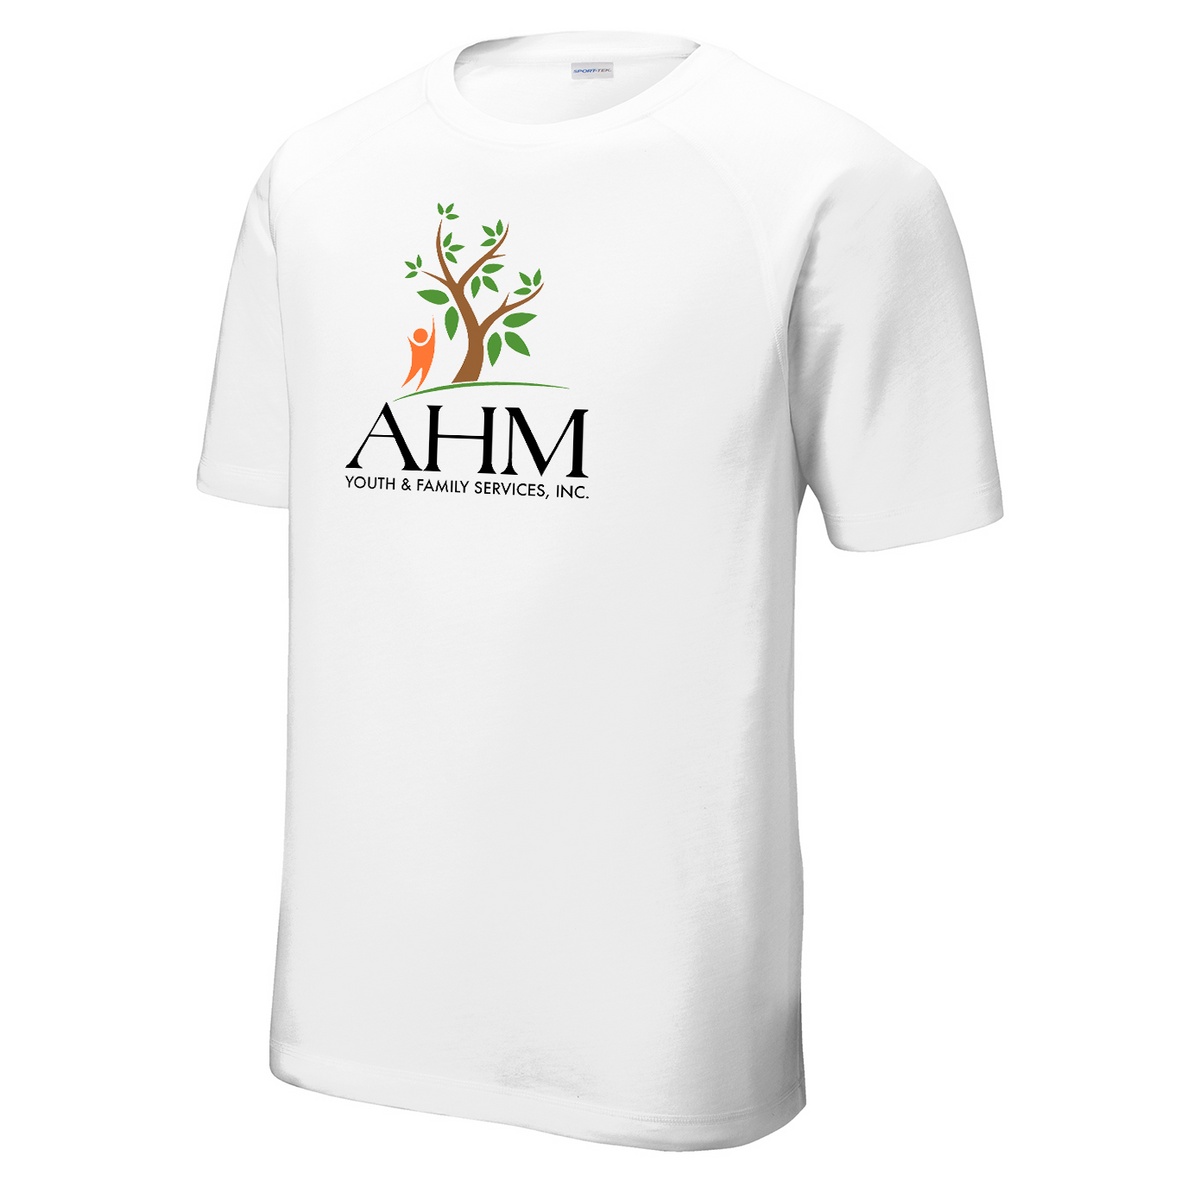 AHM Youth & Family Services Raglan CottonTouch Tee